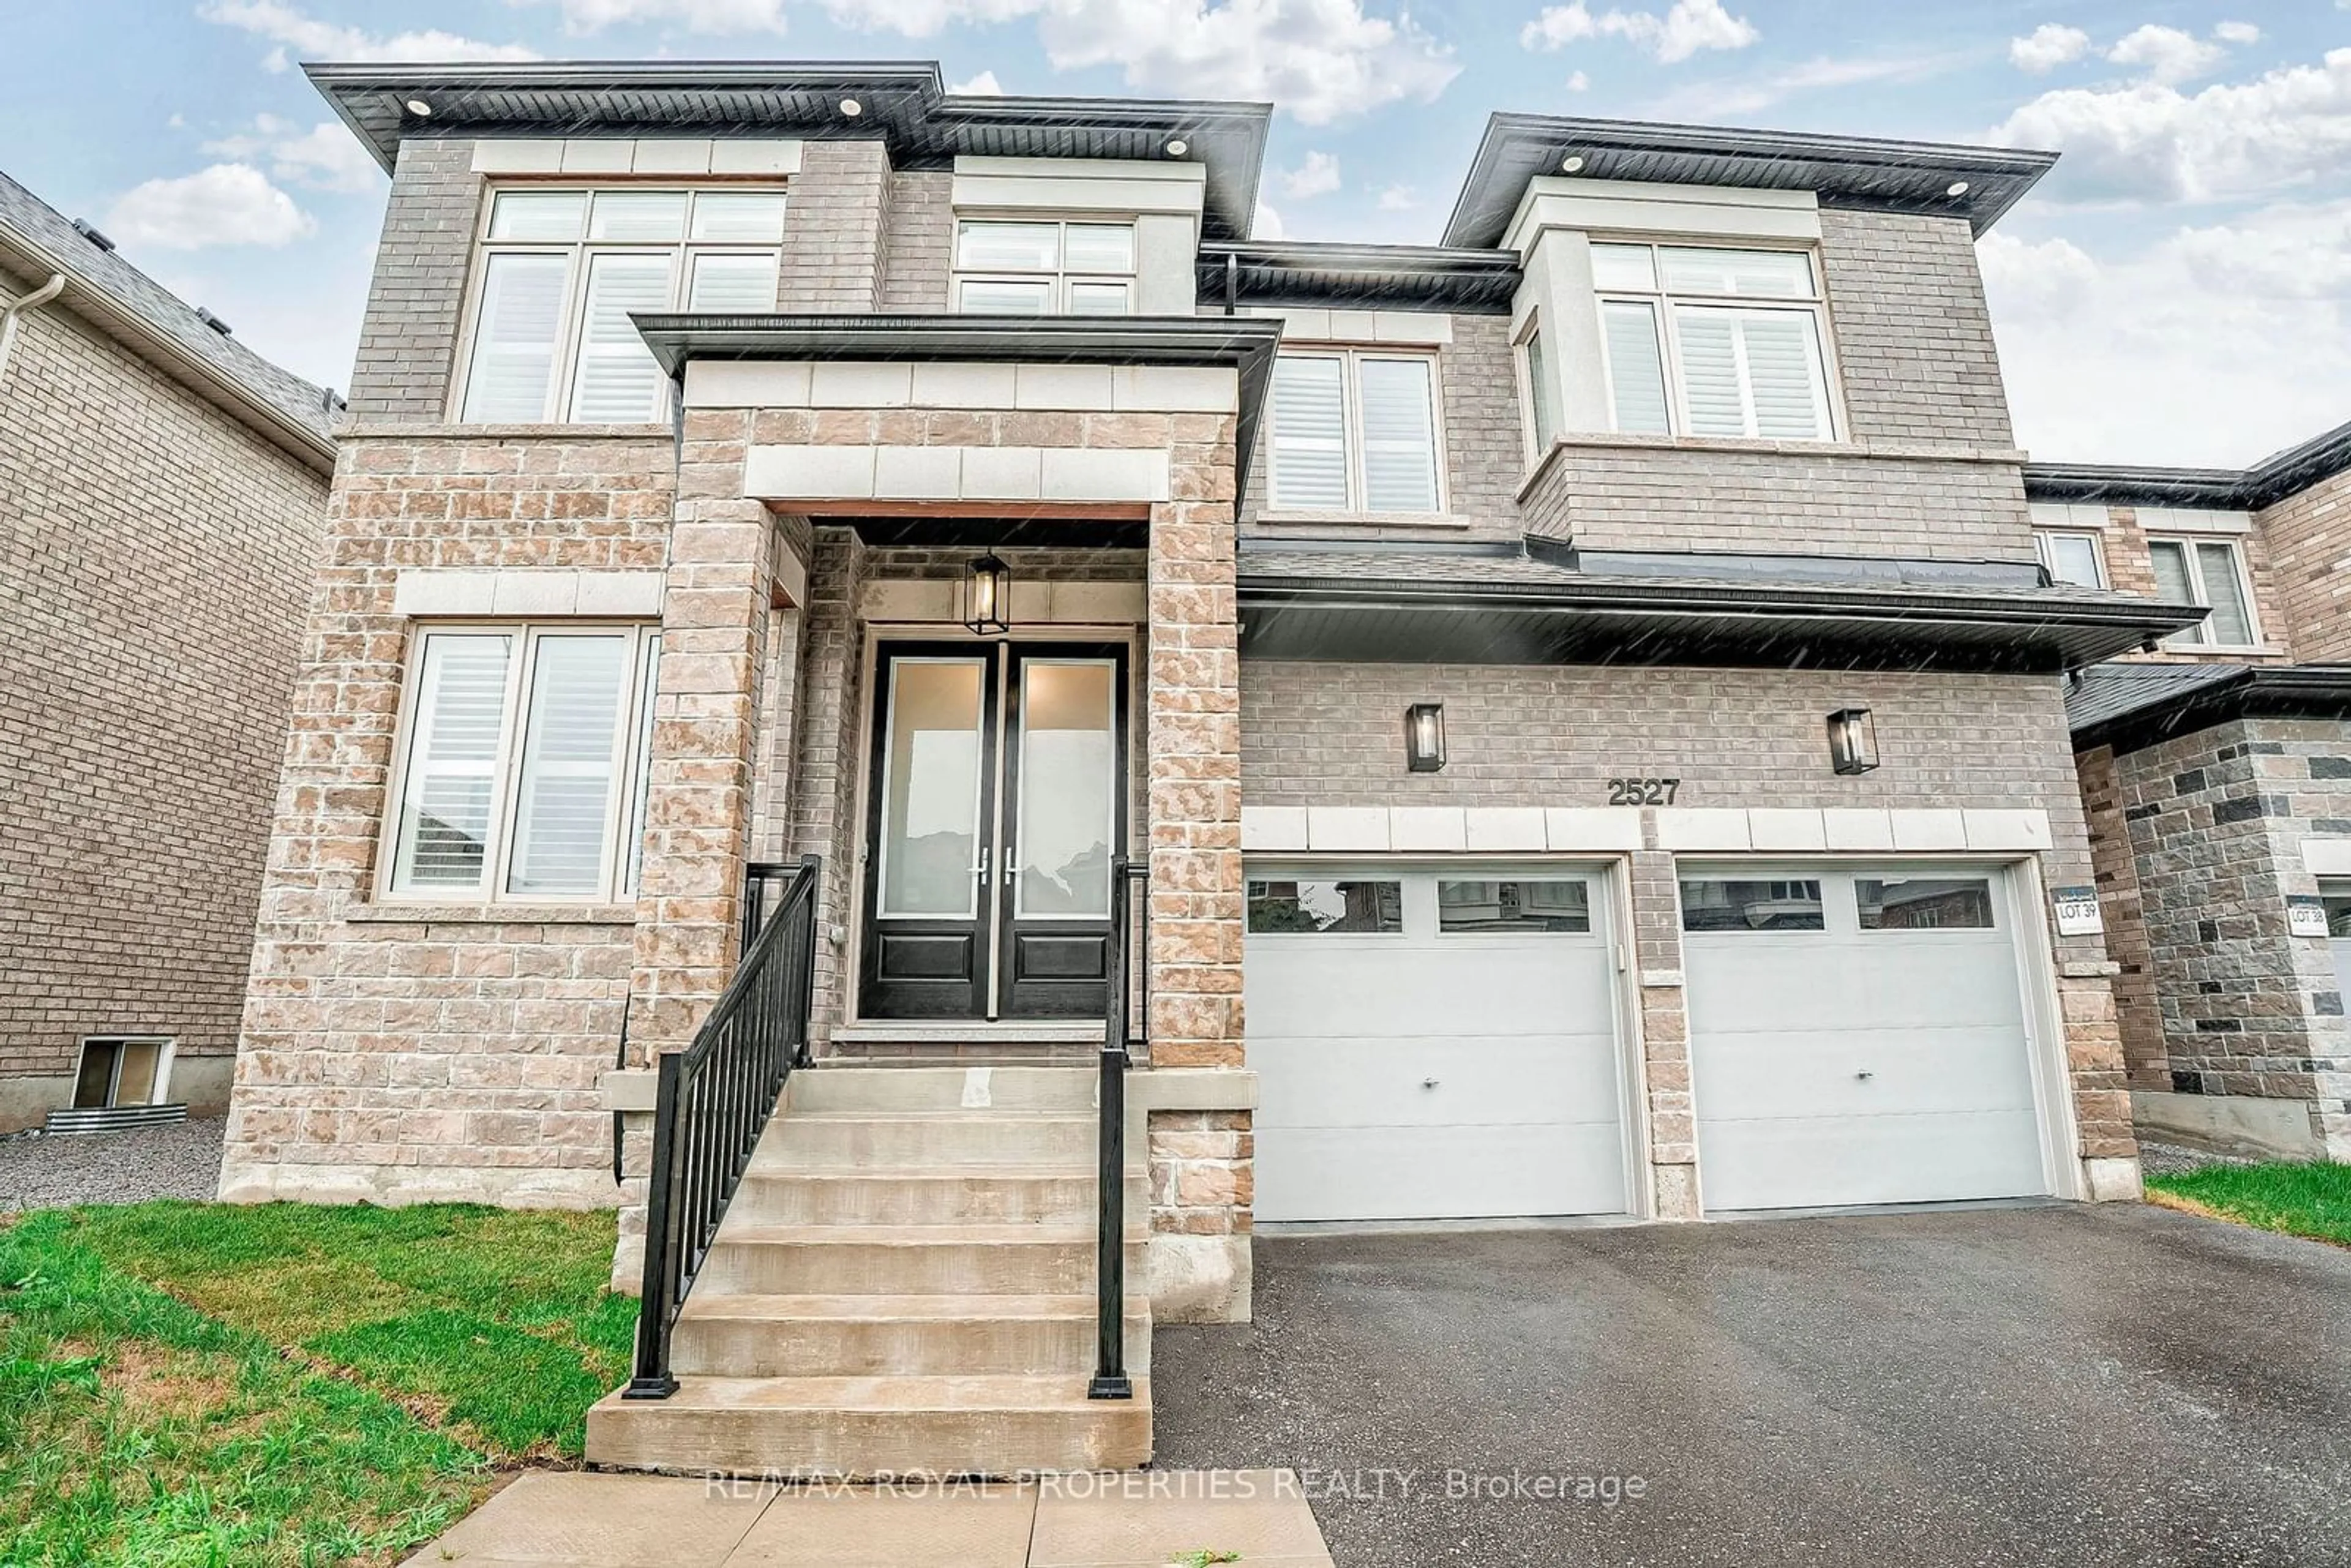 A pic from exterior of the house or condo for 2527 Florentine Pl, Pickering Ontario L1X 0H3